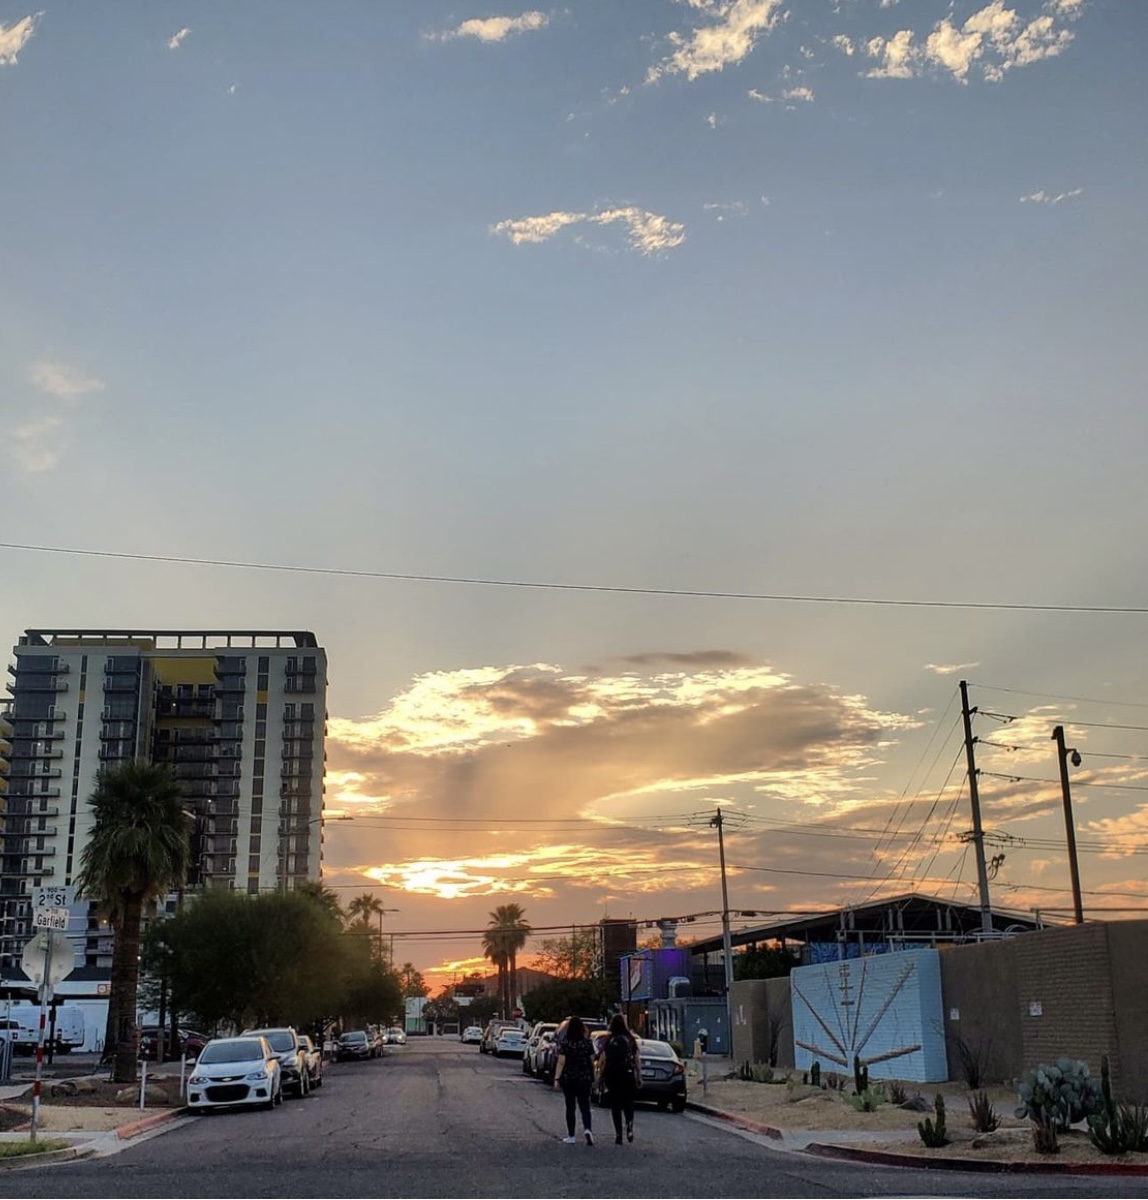 A photo of a street view landscape of a sunset and skyscraper buildings